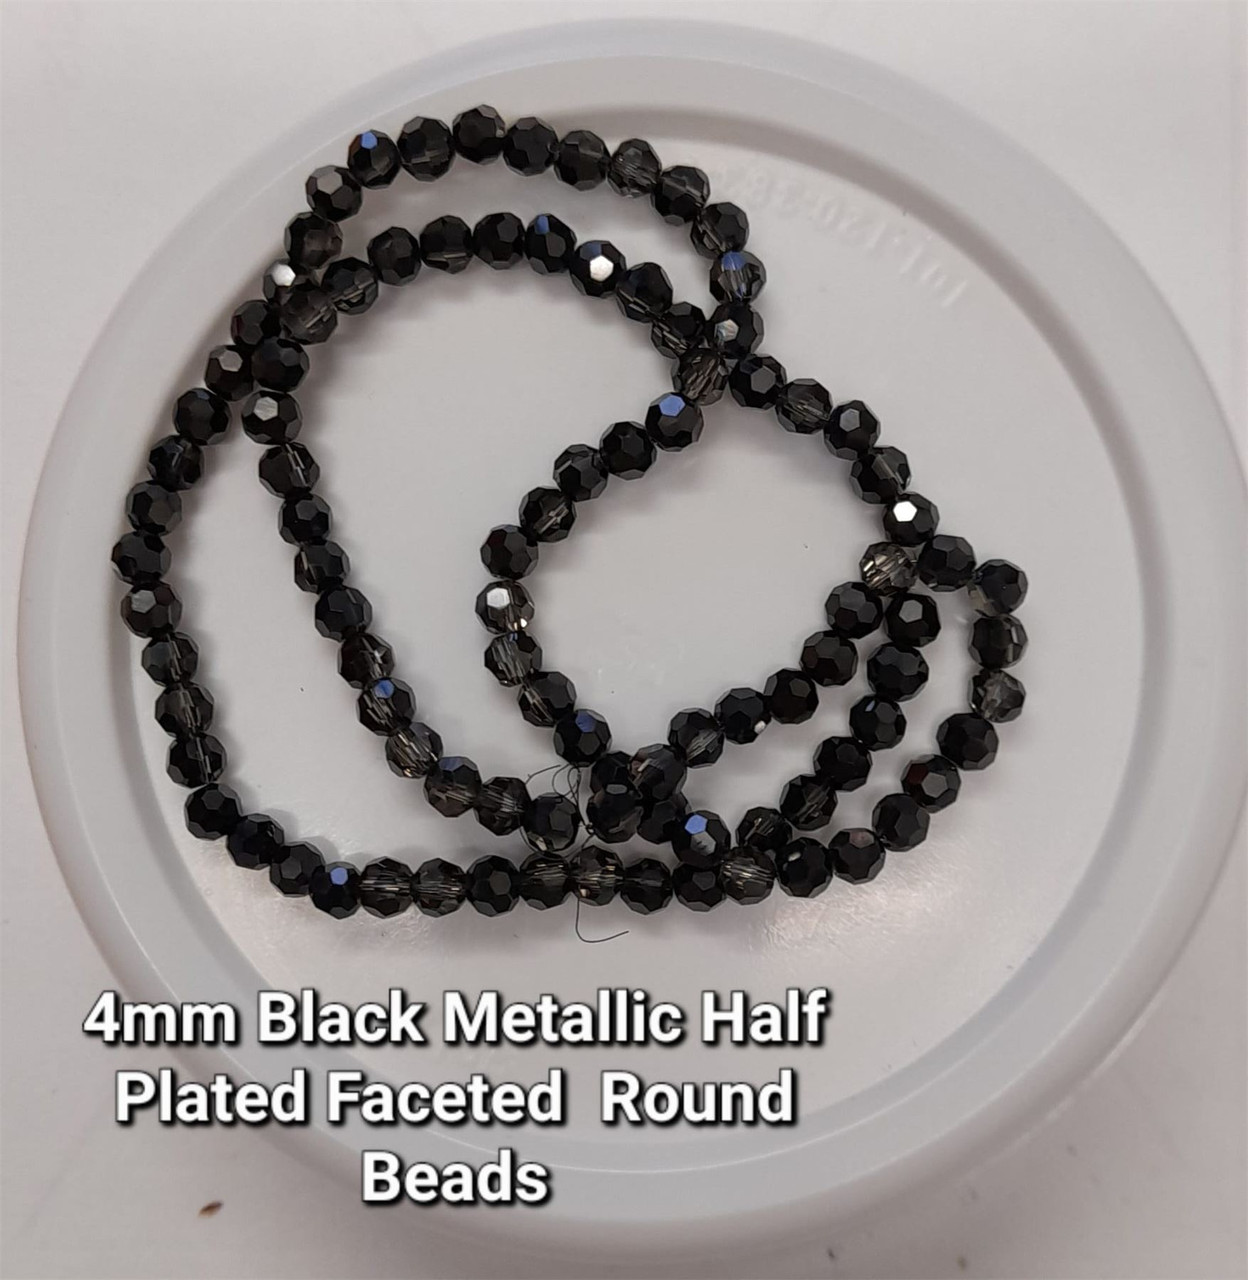 Strand of faceted round glass beads - approx 4mm, Half-Plated Black Metallic, approx 100 beads, 14-16in